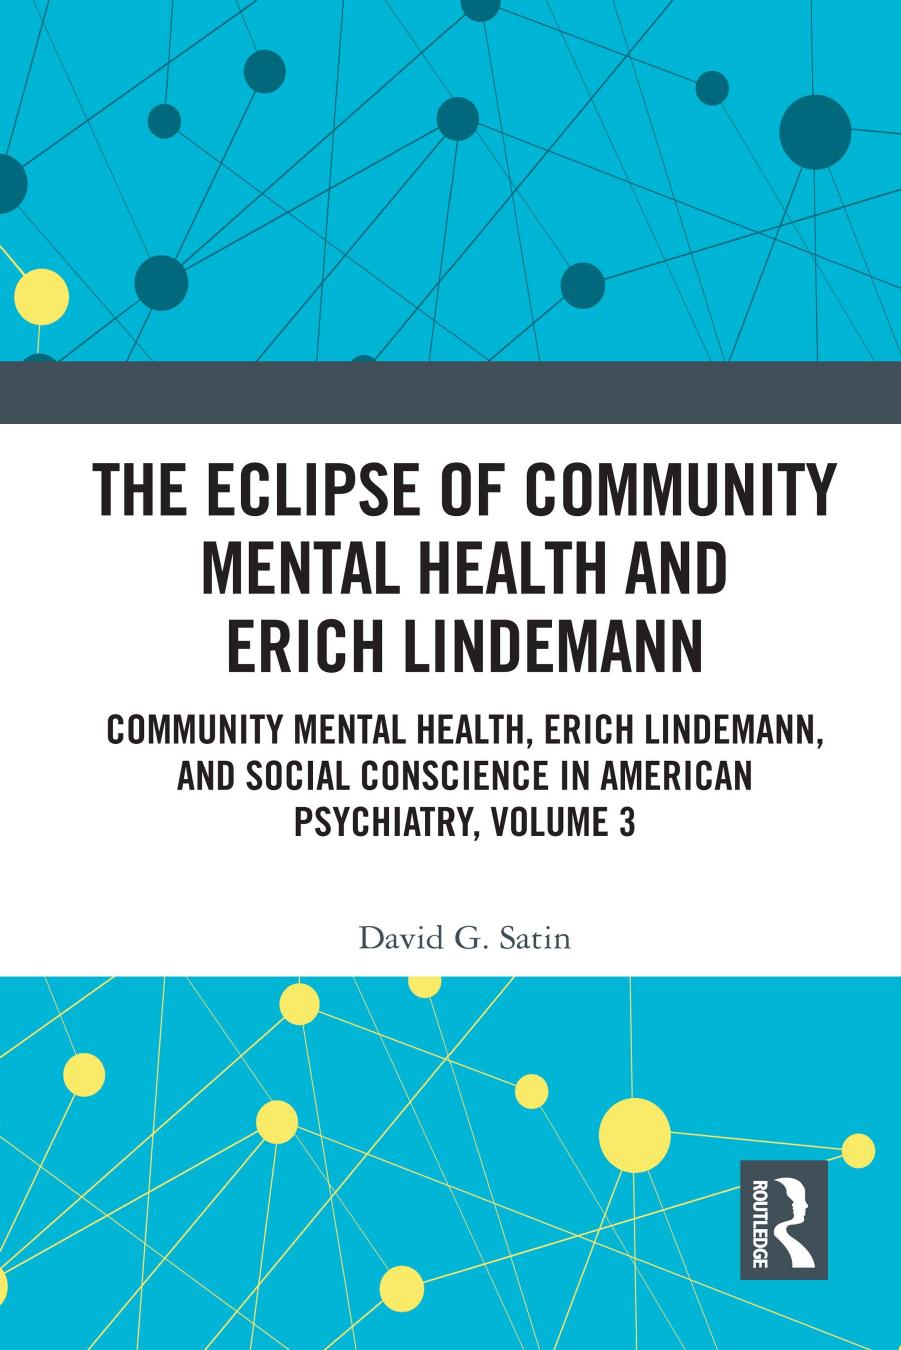 The Eclipse of Community Mental Health and Erich Lindemann; Community Mental Health, Erich Lindemann, and Social Conscience in American Psychiatry, Volume 3